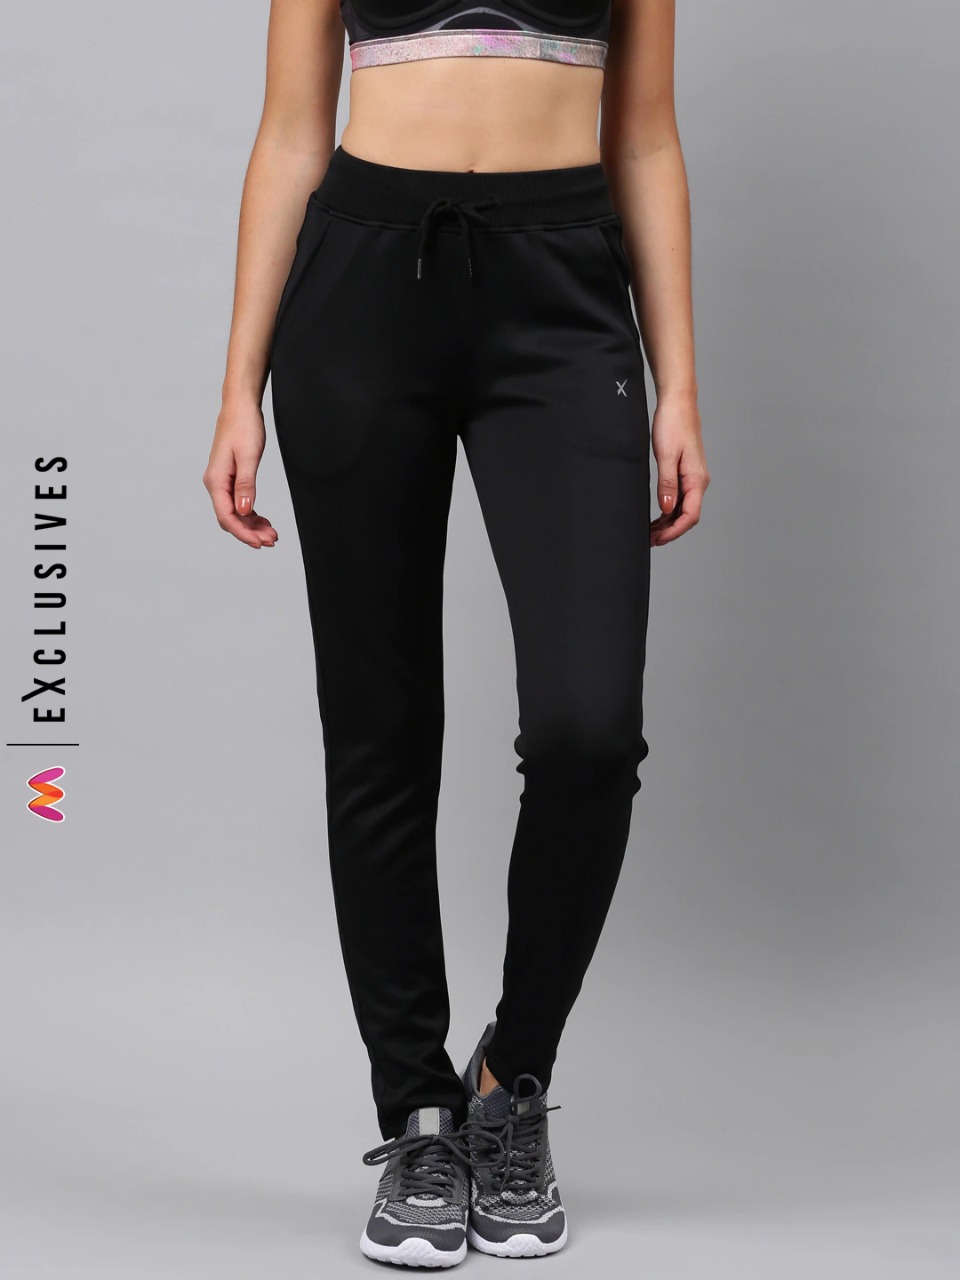 45% OFF on HRX by Hrithik Roshan Men Anthracite Antimicrobial Rapid-Dry  Running Track Pants on Myntra | PaisaWapas.com